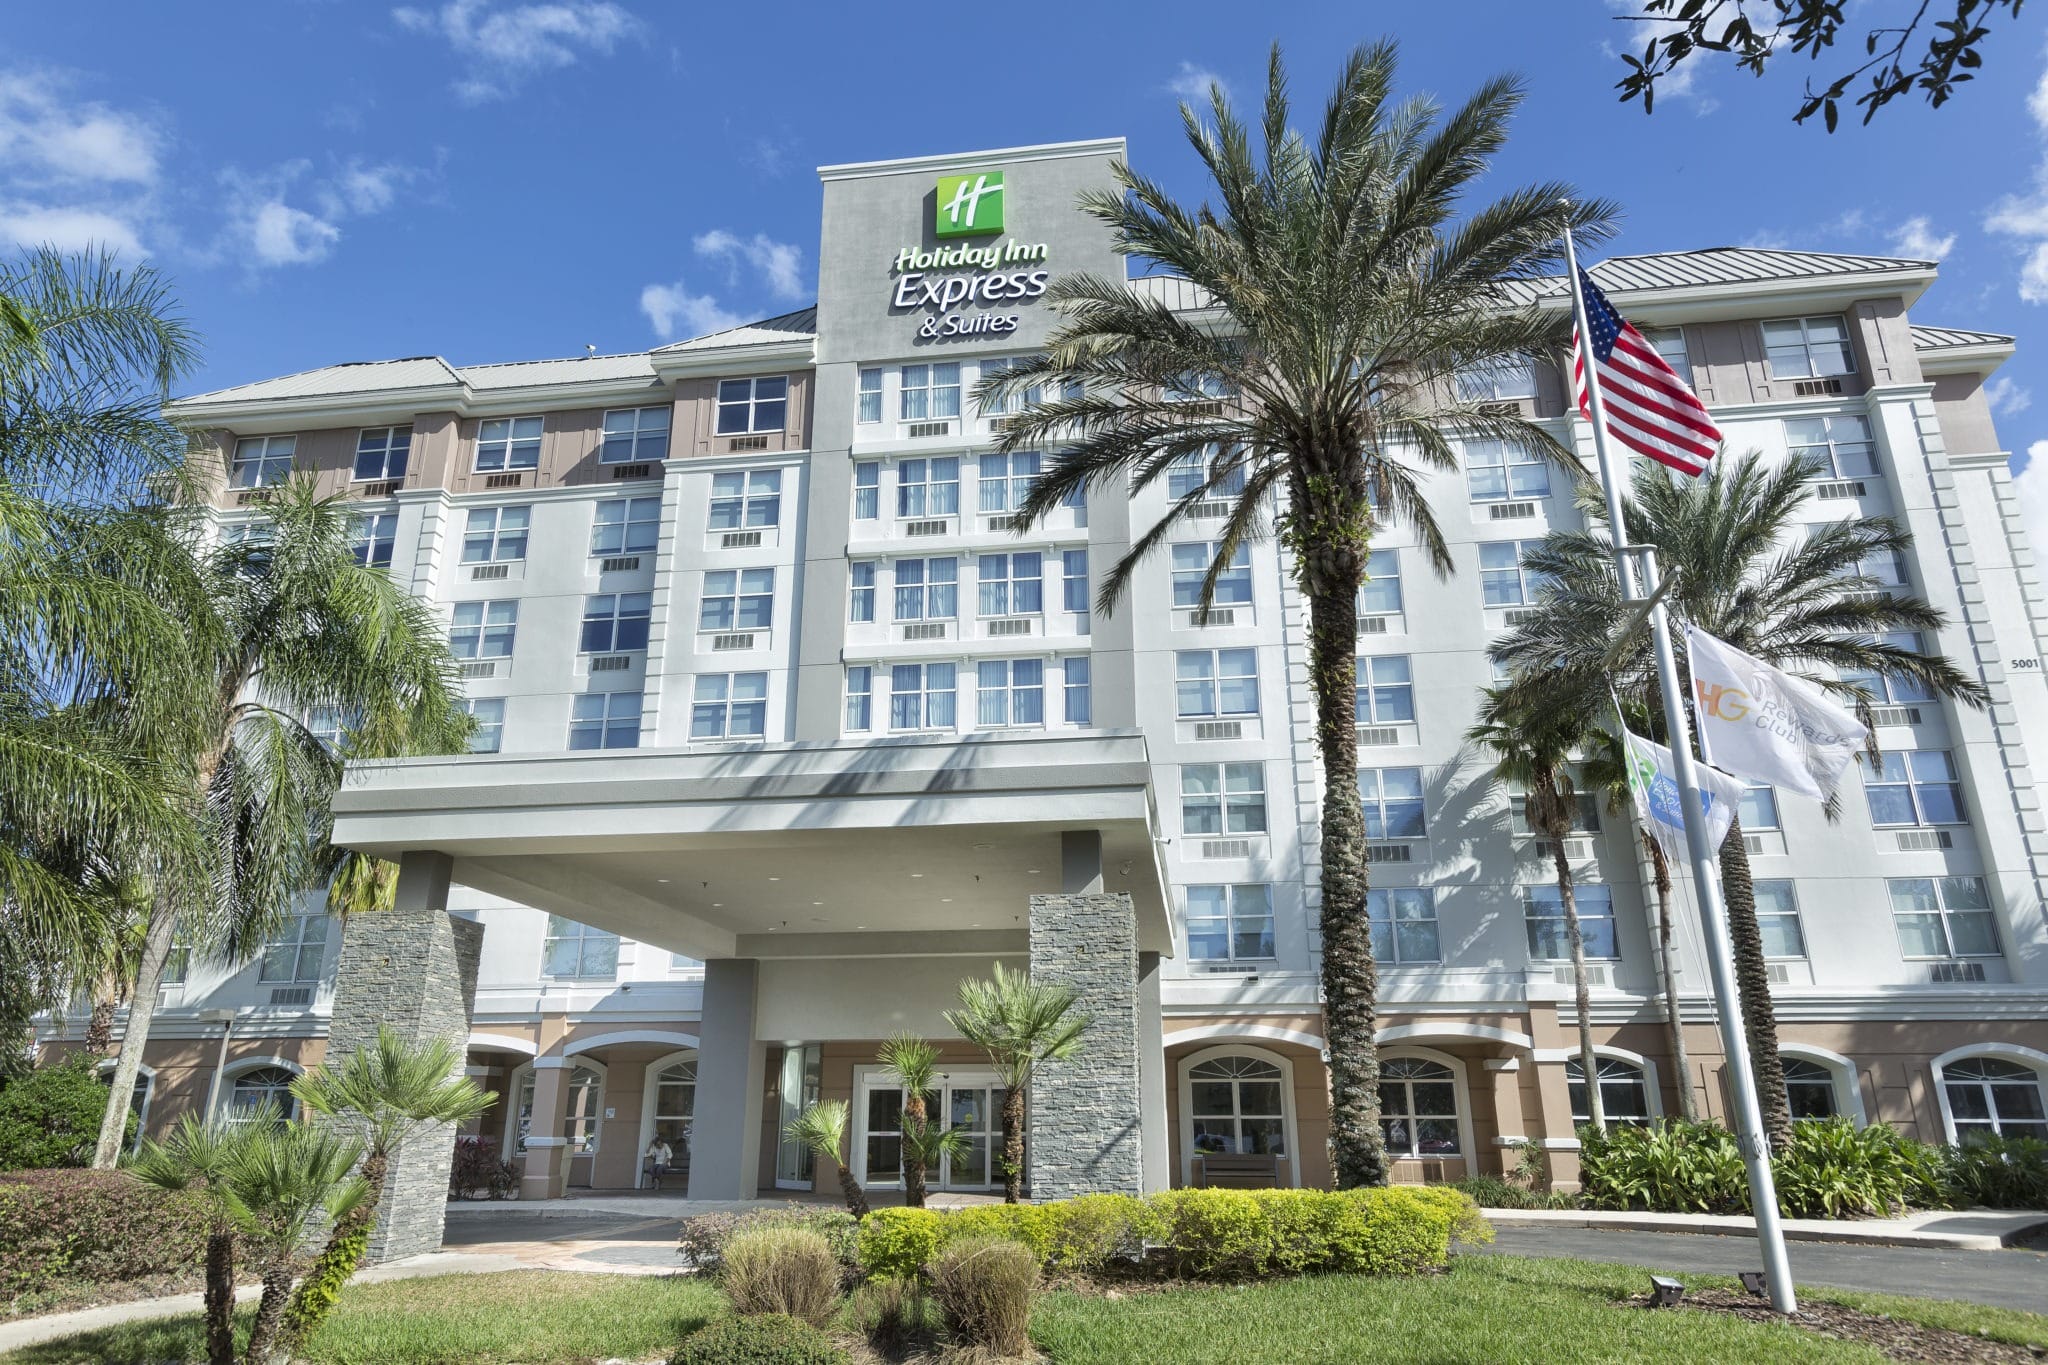 Hotels in Jacksonville, Florida  Holiday Inn Express & Suites Jacksonville  - Town Center